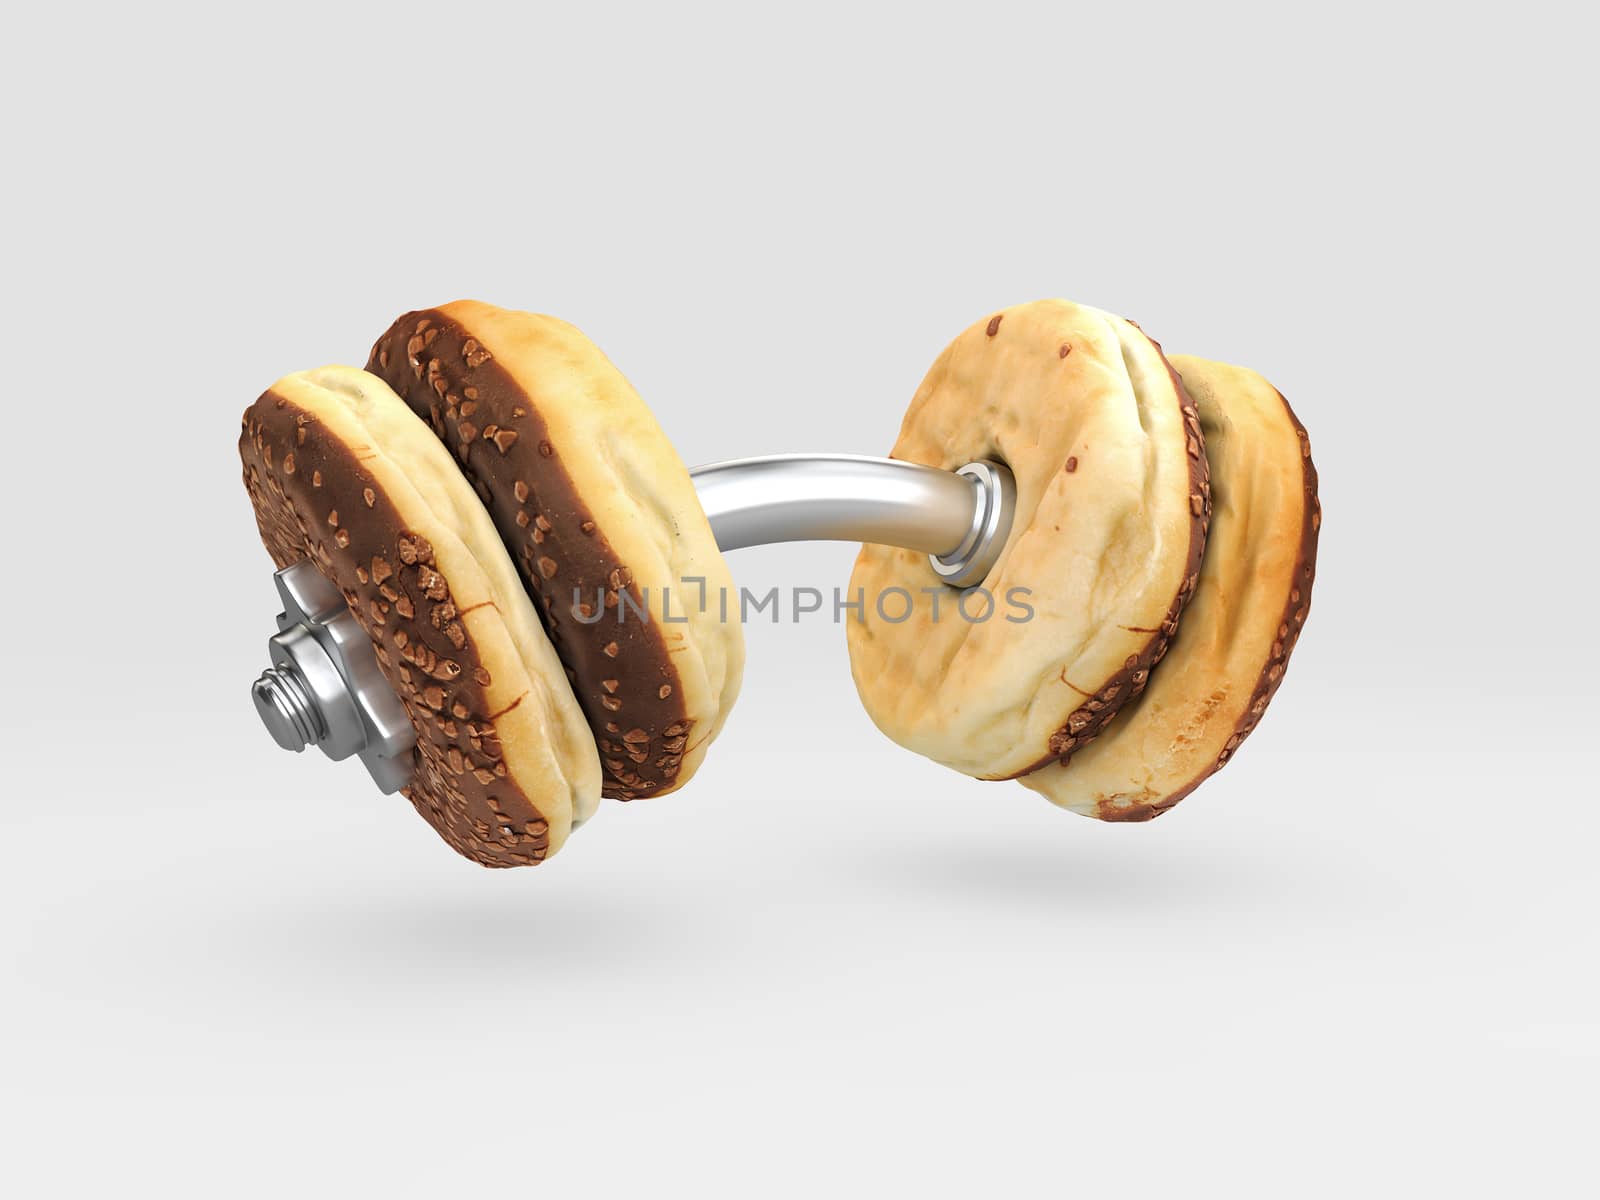 3d rendering of food dumbbell, the choice between sports and fast food, clipping path included by tussik